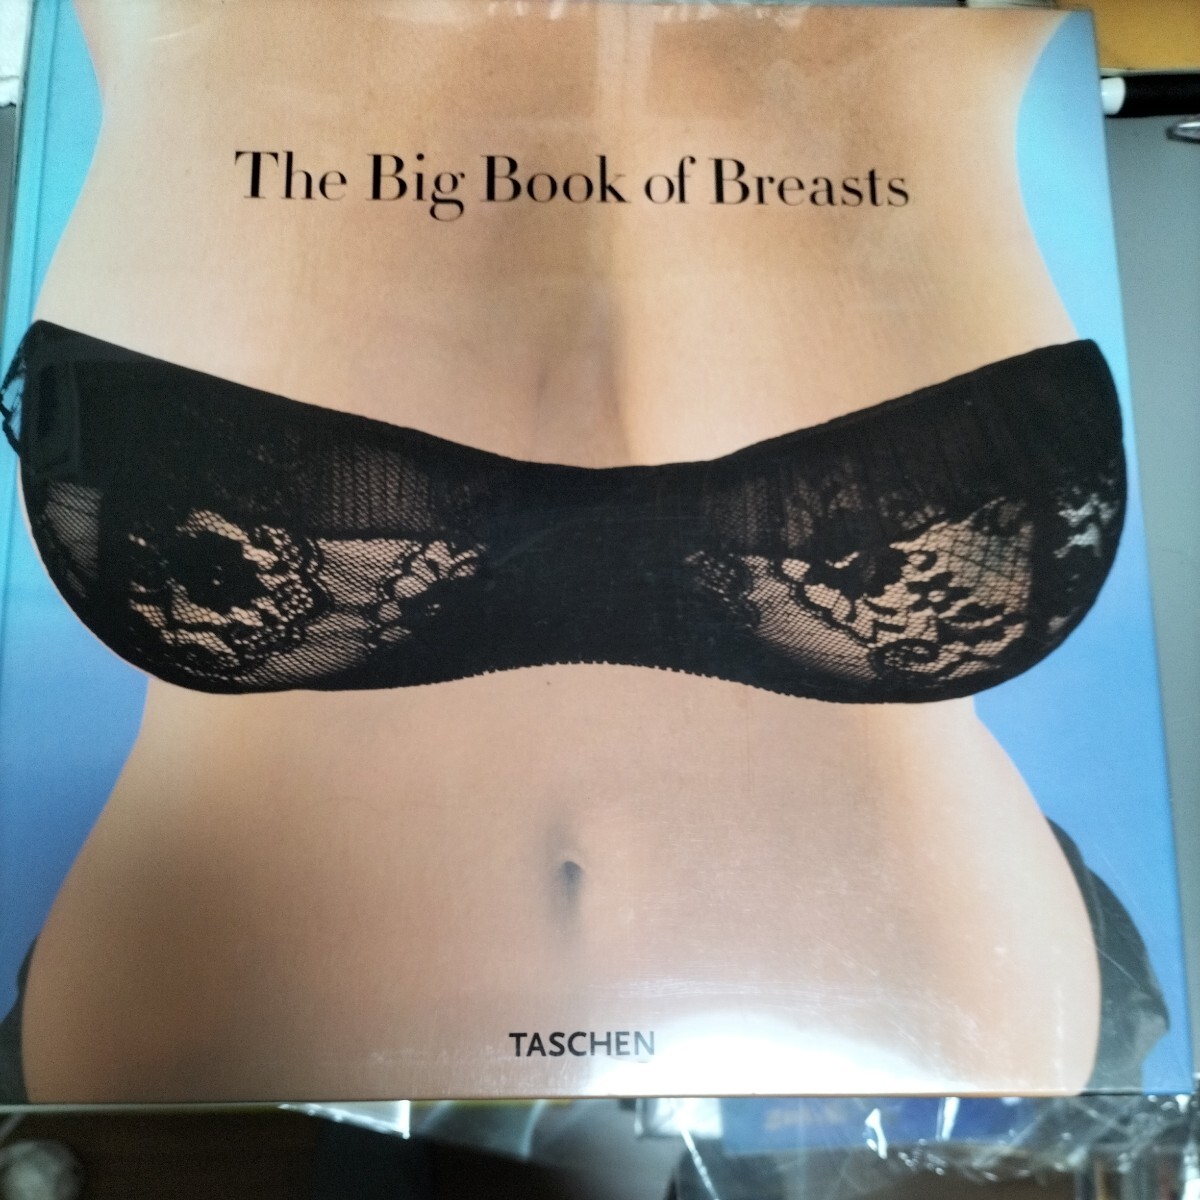  photoalbum abroad gravure nude TASCHEN large book@THE big bookof breastS